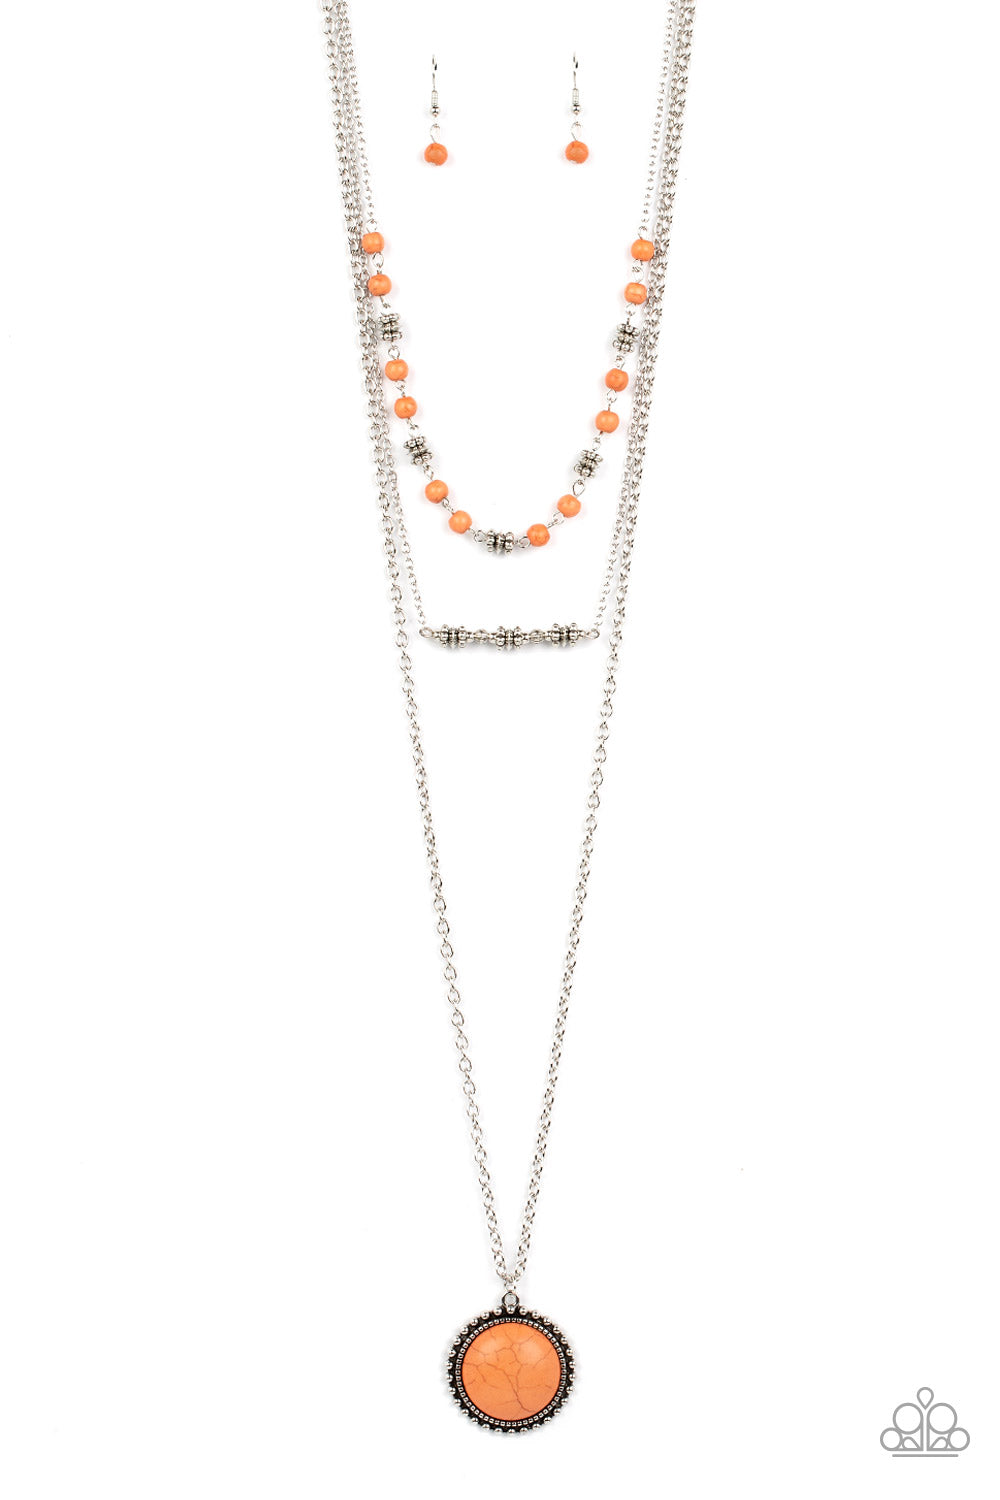 Sahara Symphony Paparazzi Accessories Necklace with Earrings Orange